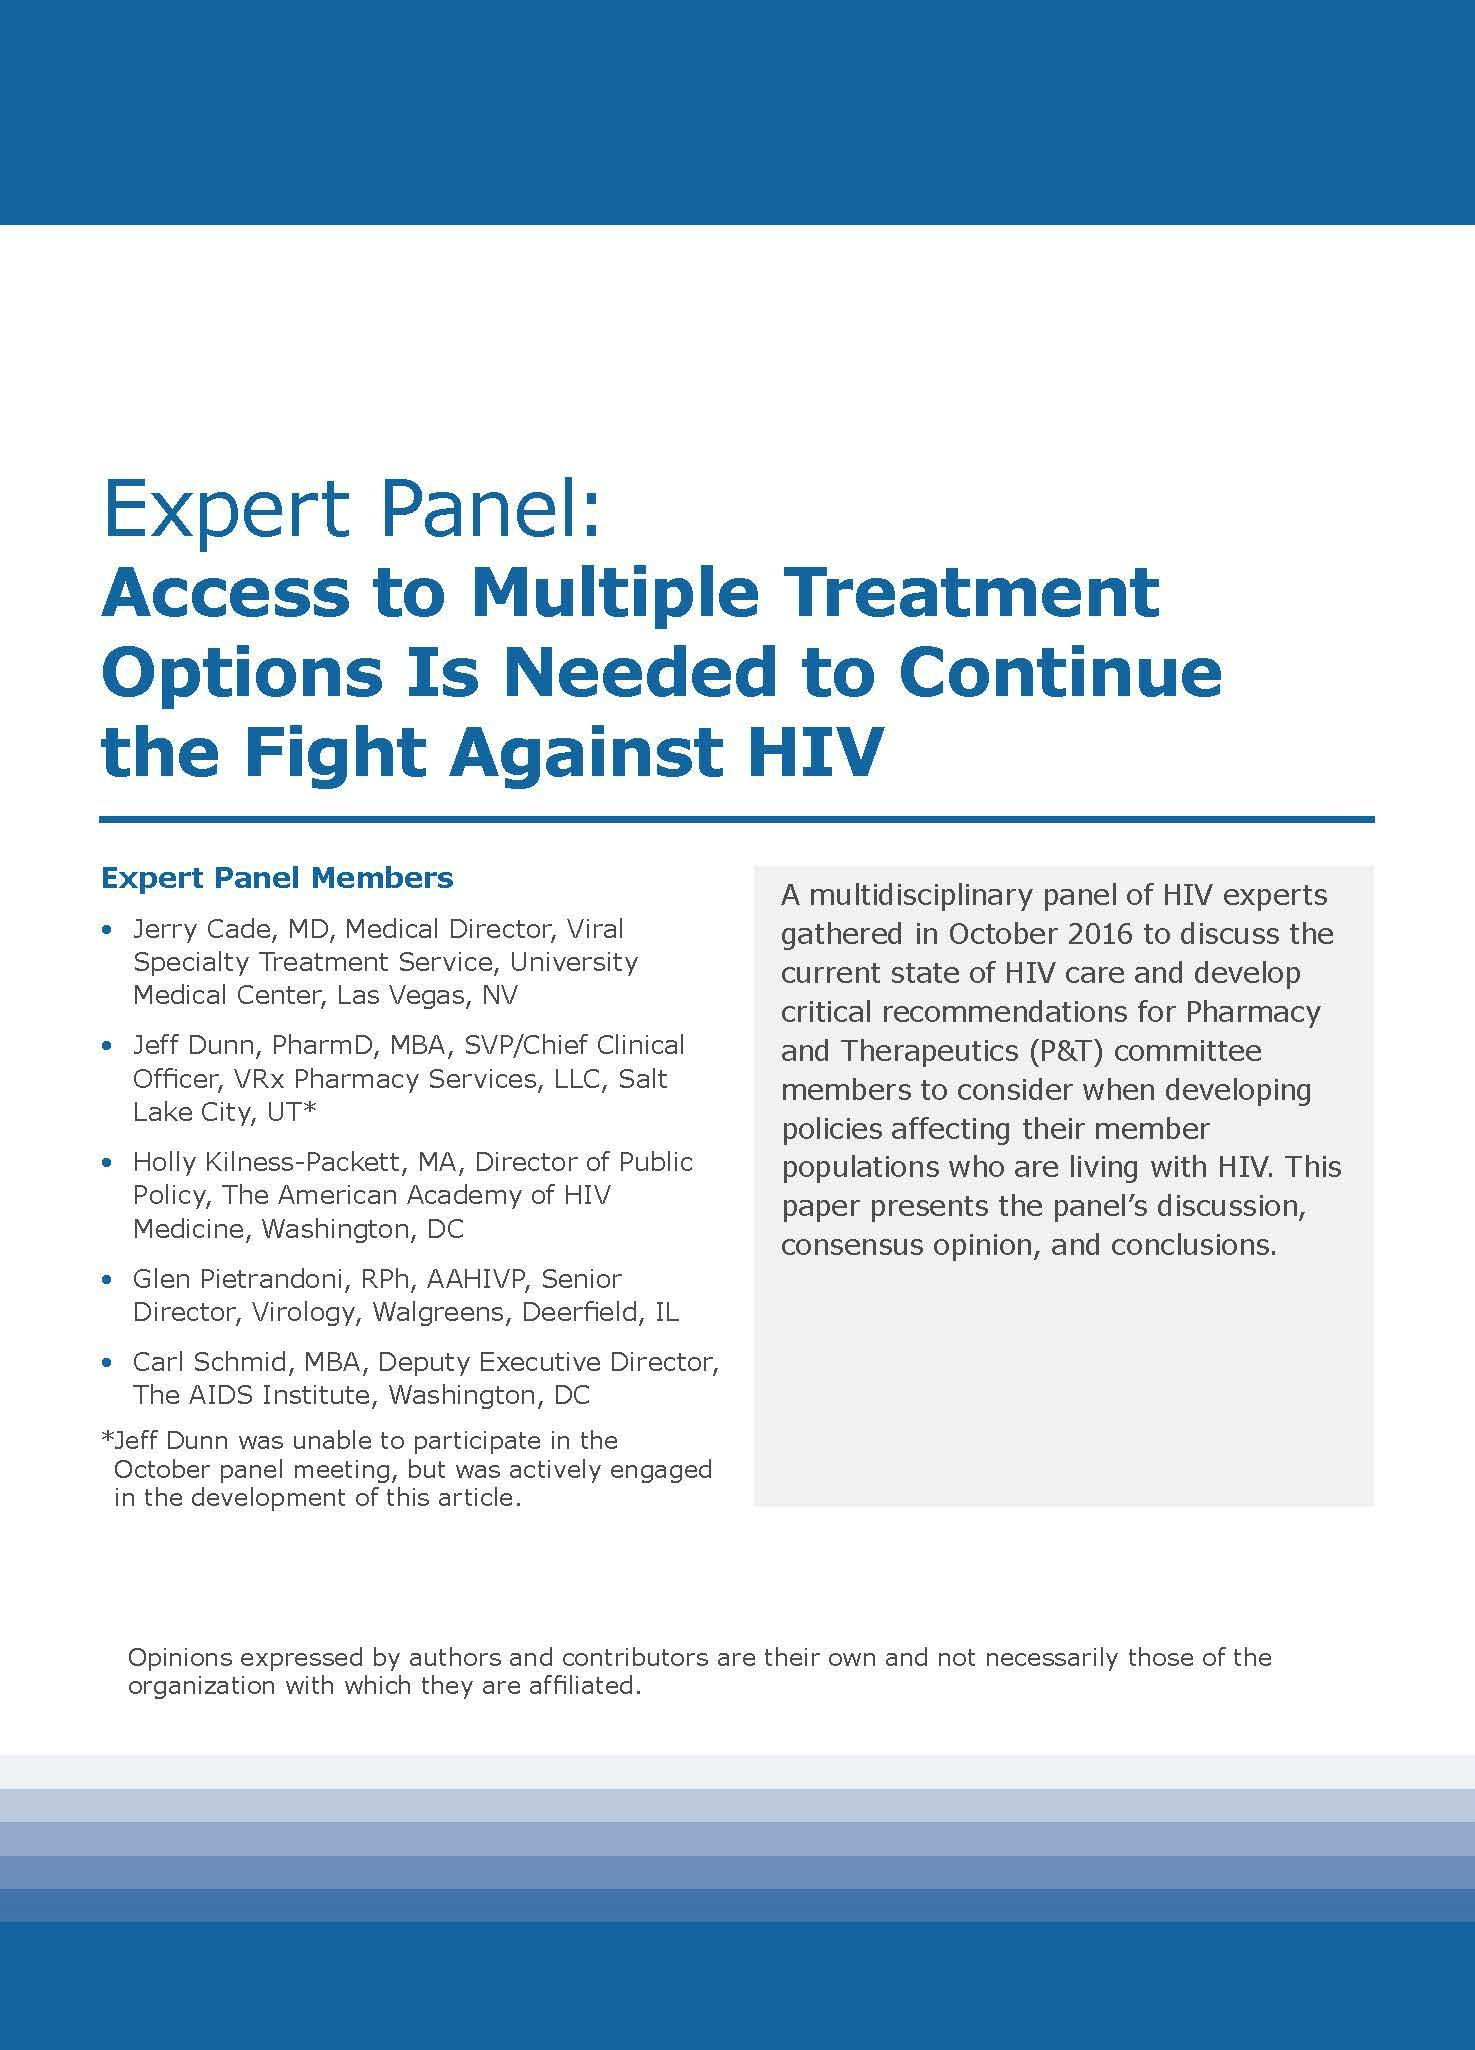 Expert Panel: Access to Multiple Treatment Options Is Needed to Continue the Fight Against HIV